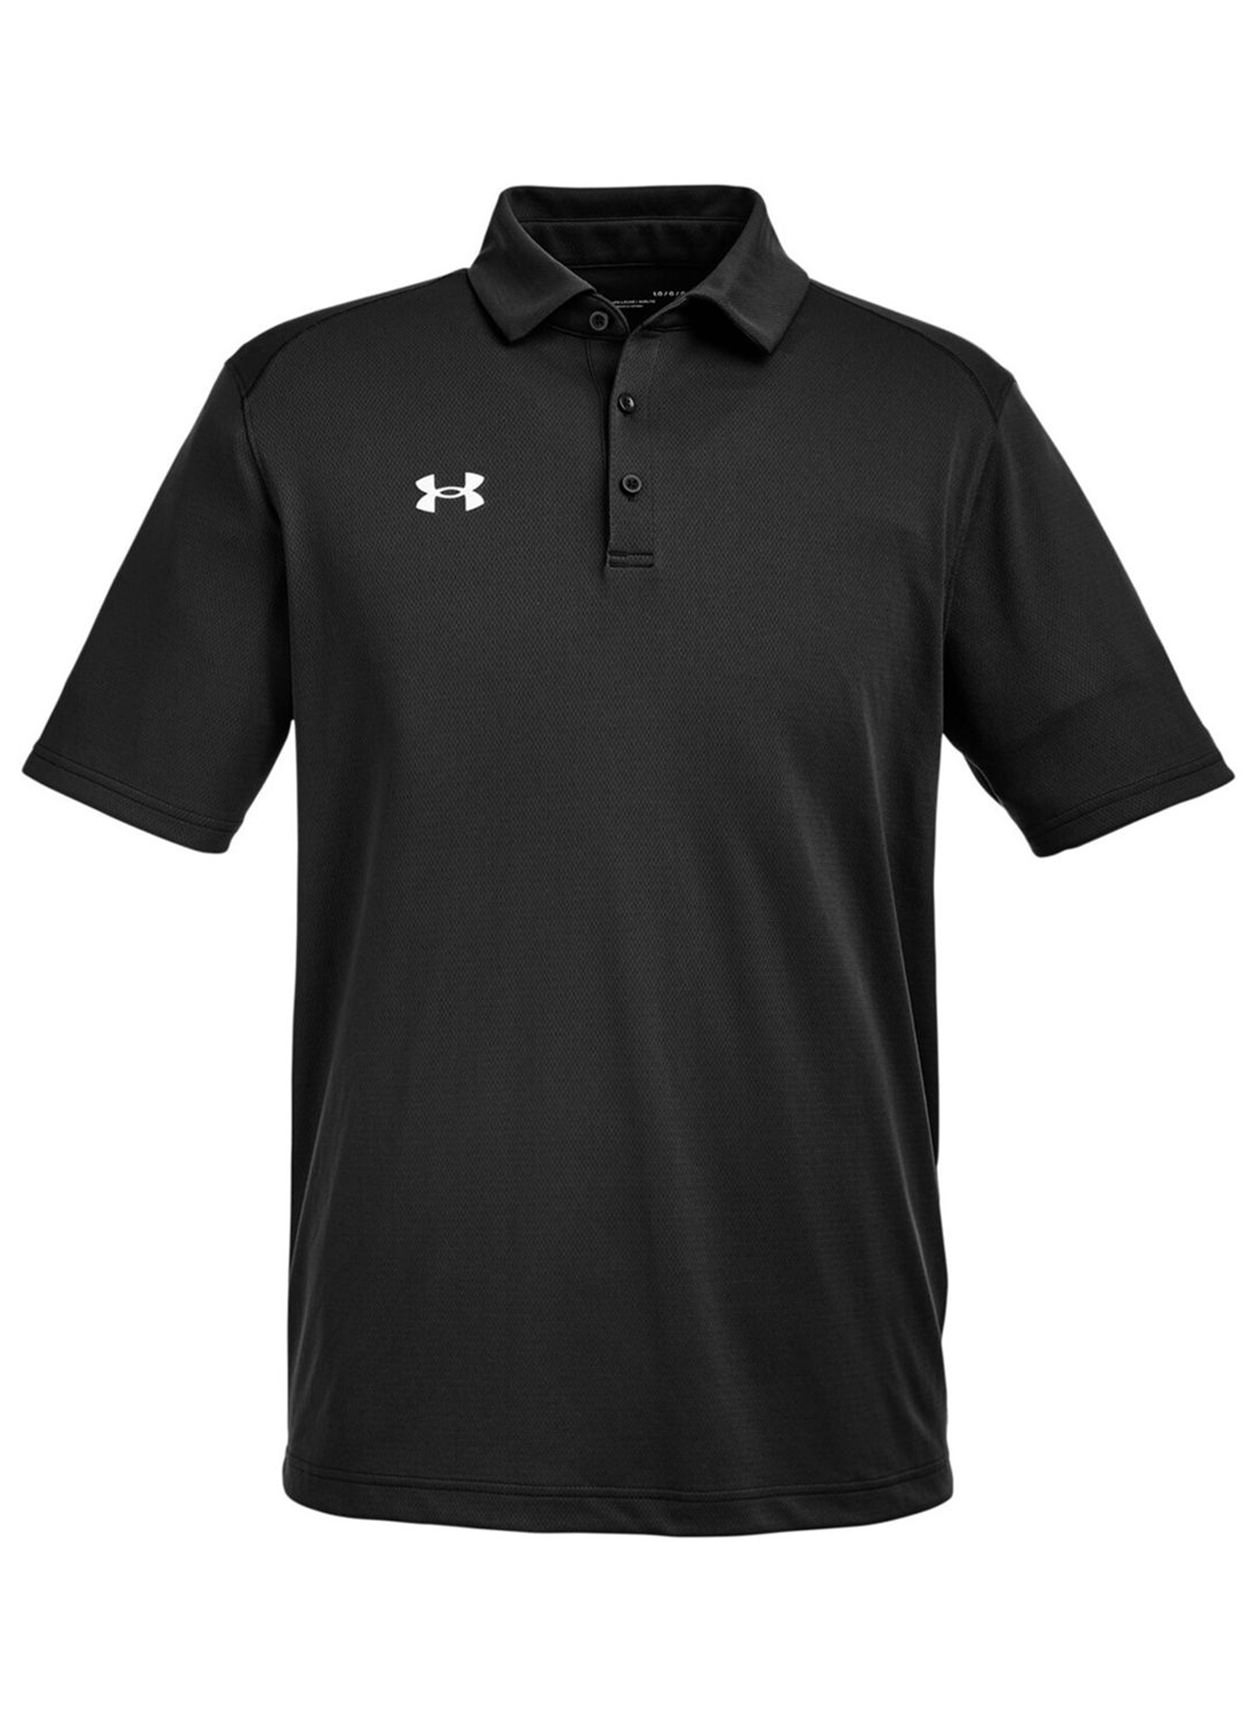 Embroidered Under Armour Men's Black Tech Polo